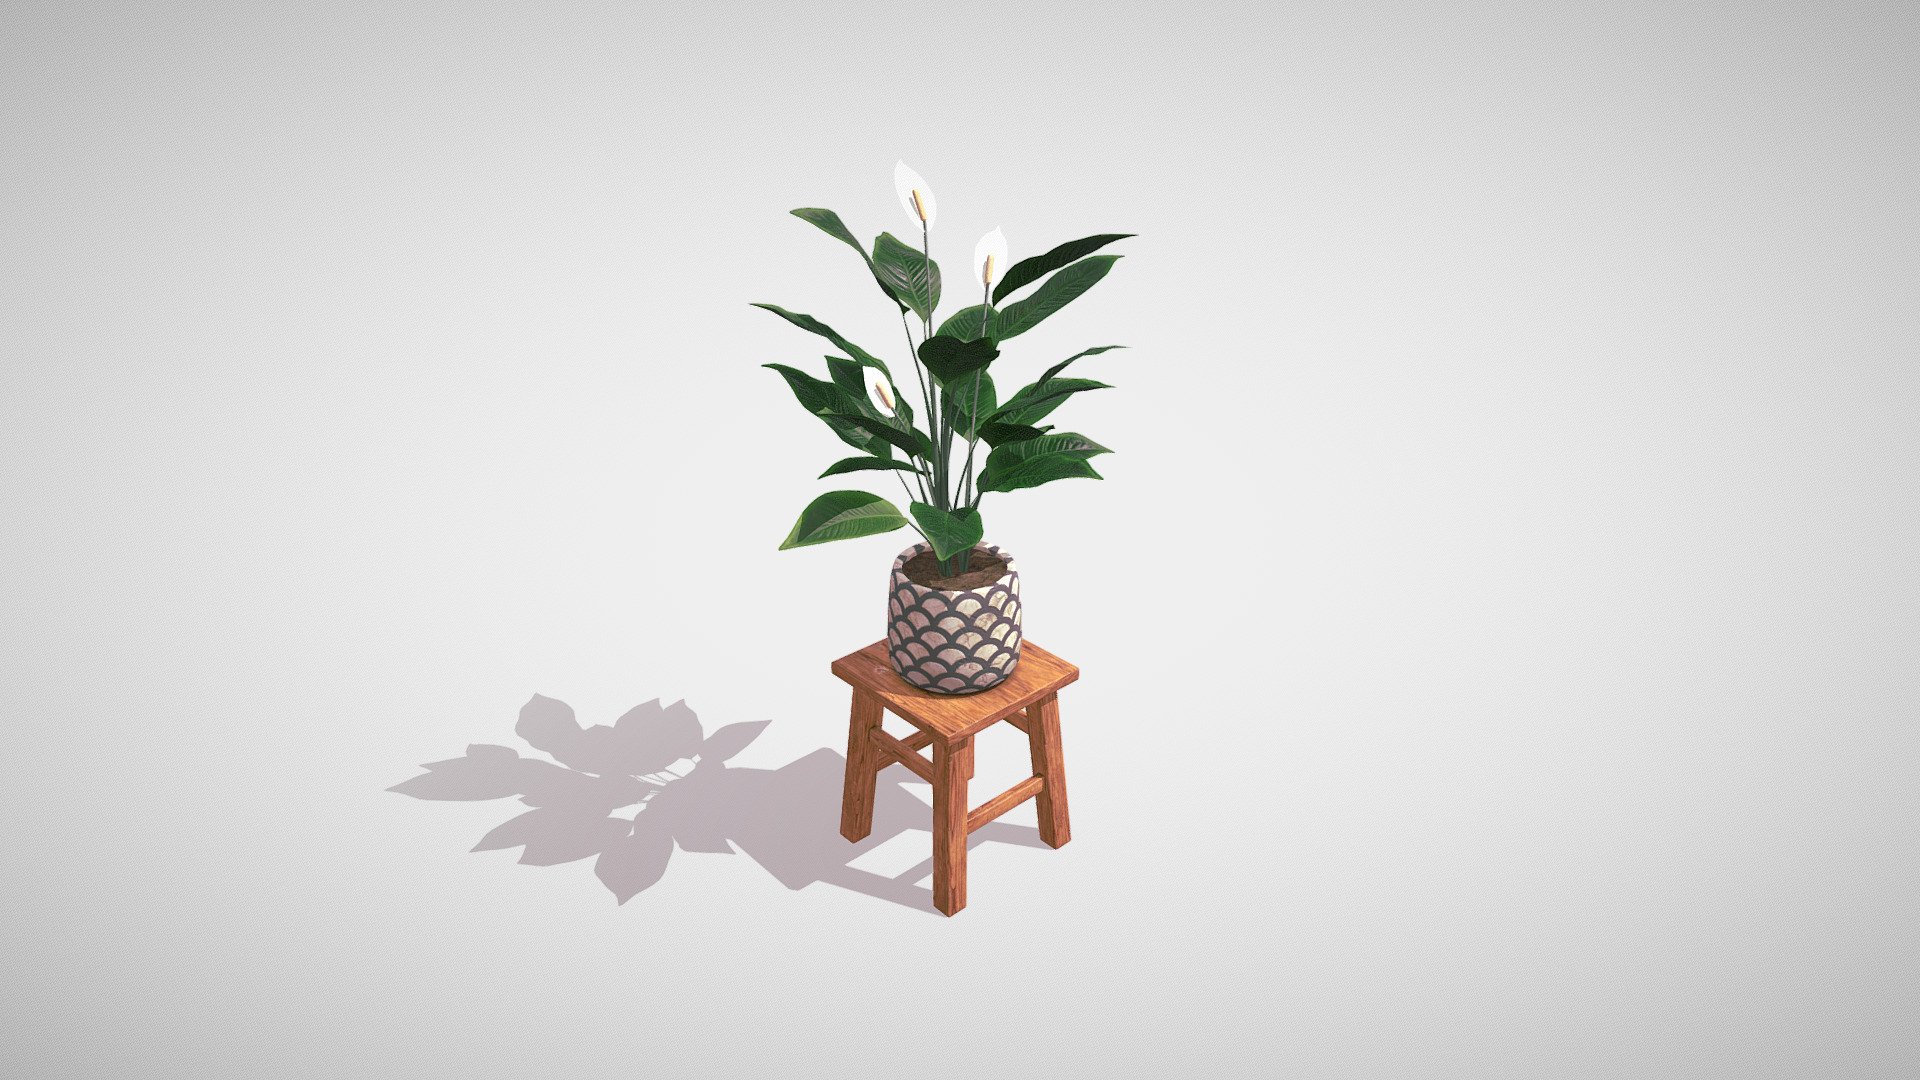 A beautiful peace lily not only makes your home interior design more beautiful, but also looks fresher and warmer. This 3d flower model can be placed for interior or exterior accessories for your visualization design.

Dimension include pot and stand

Width = 695 mm
Depth = 645 mm
Height = 1290 mm

Polygon = 14350
Vertices = 15461

Use PBR material 
UV maps non overlapping

File Format
Blender 3.1 (Cycles)
FBX
OBJ
glTF embedded - Peace lily - 3D model by amri3dstudio 3d model